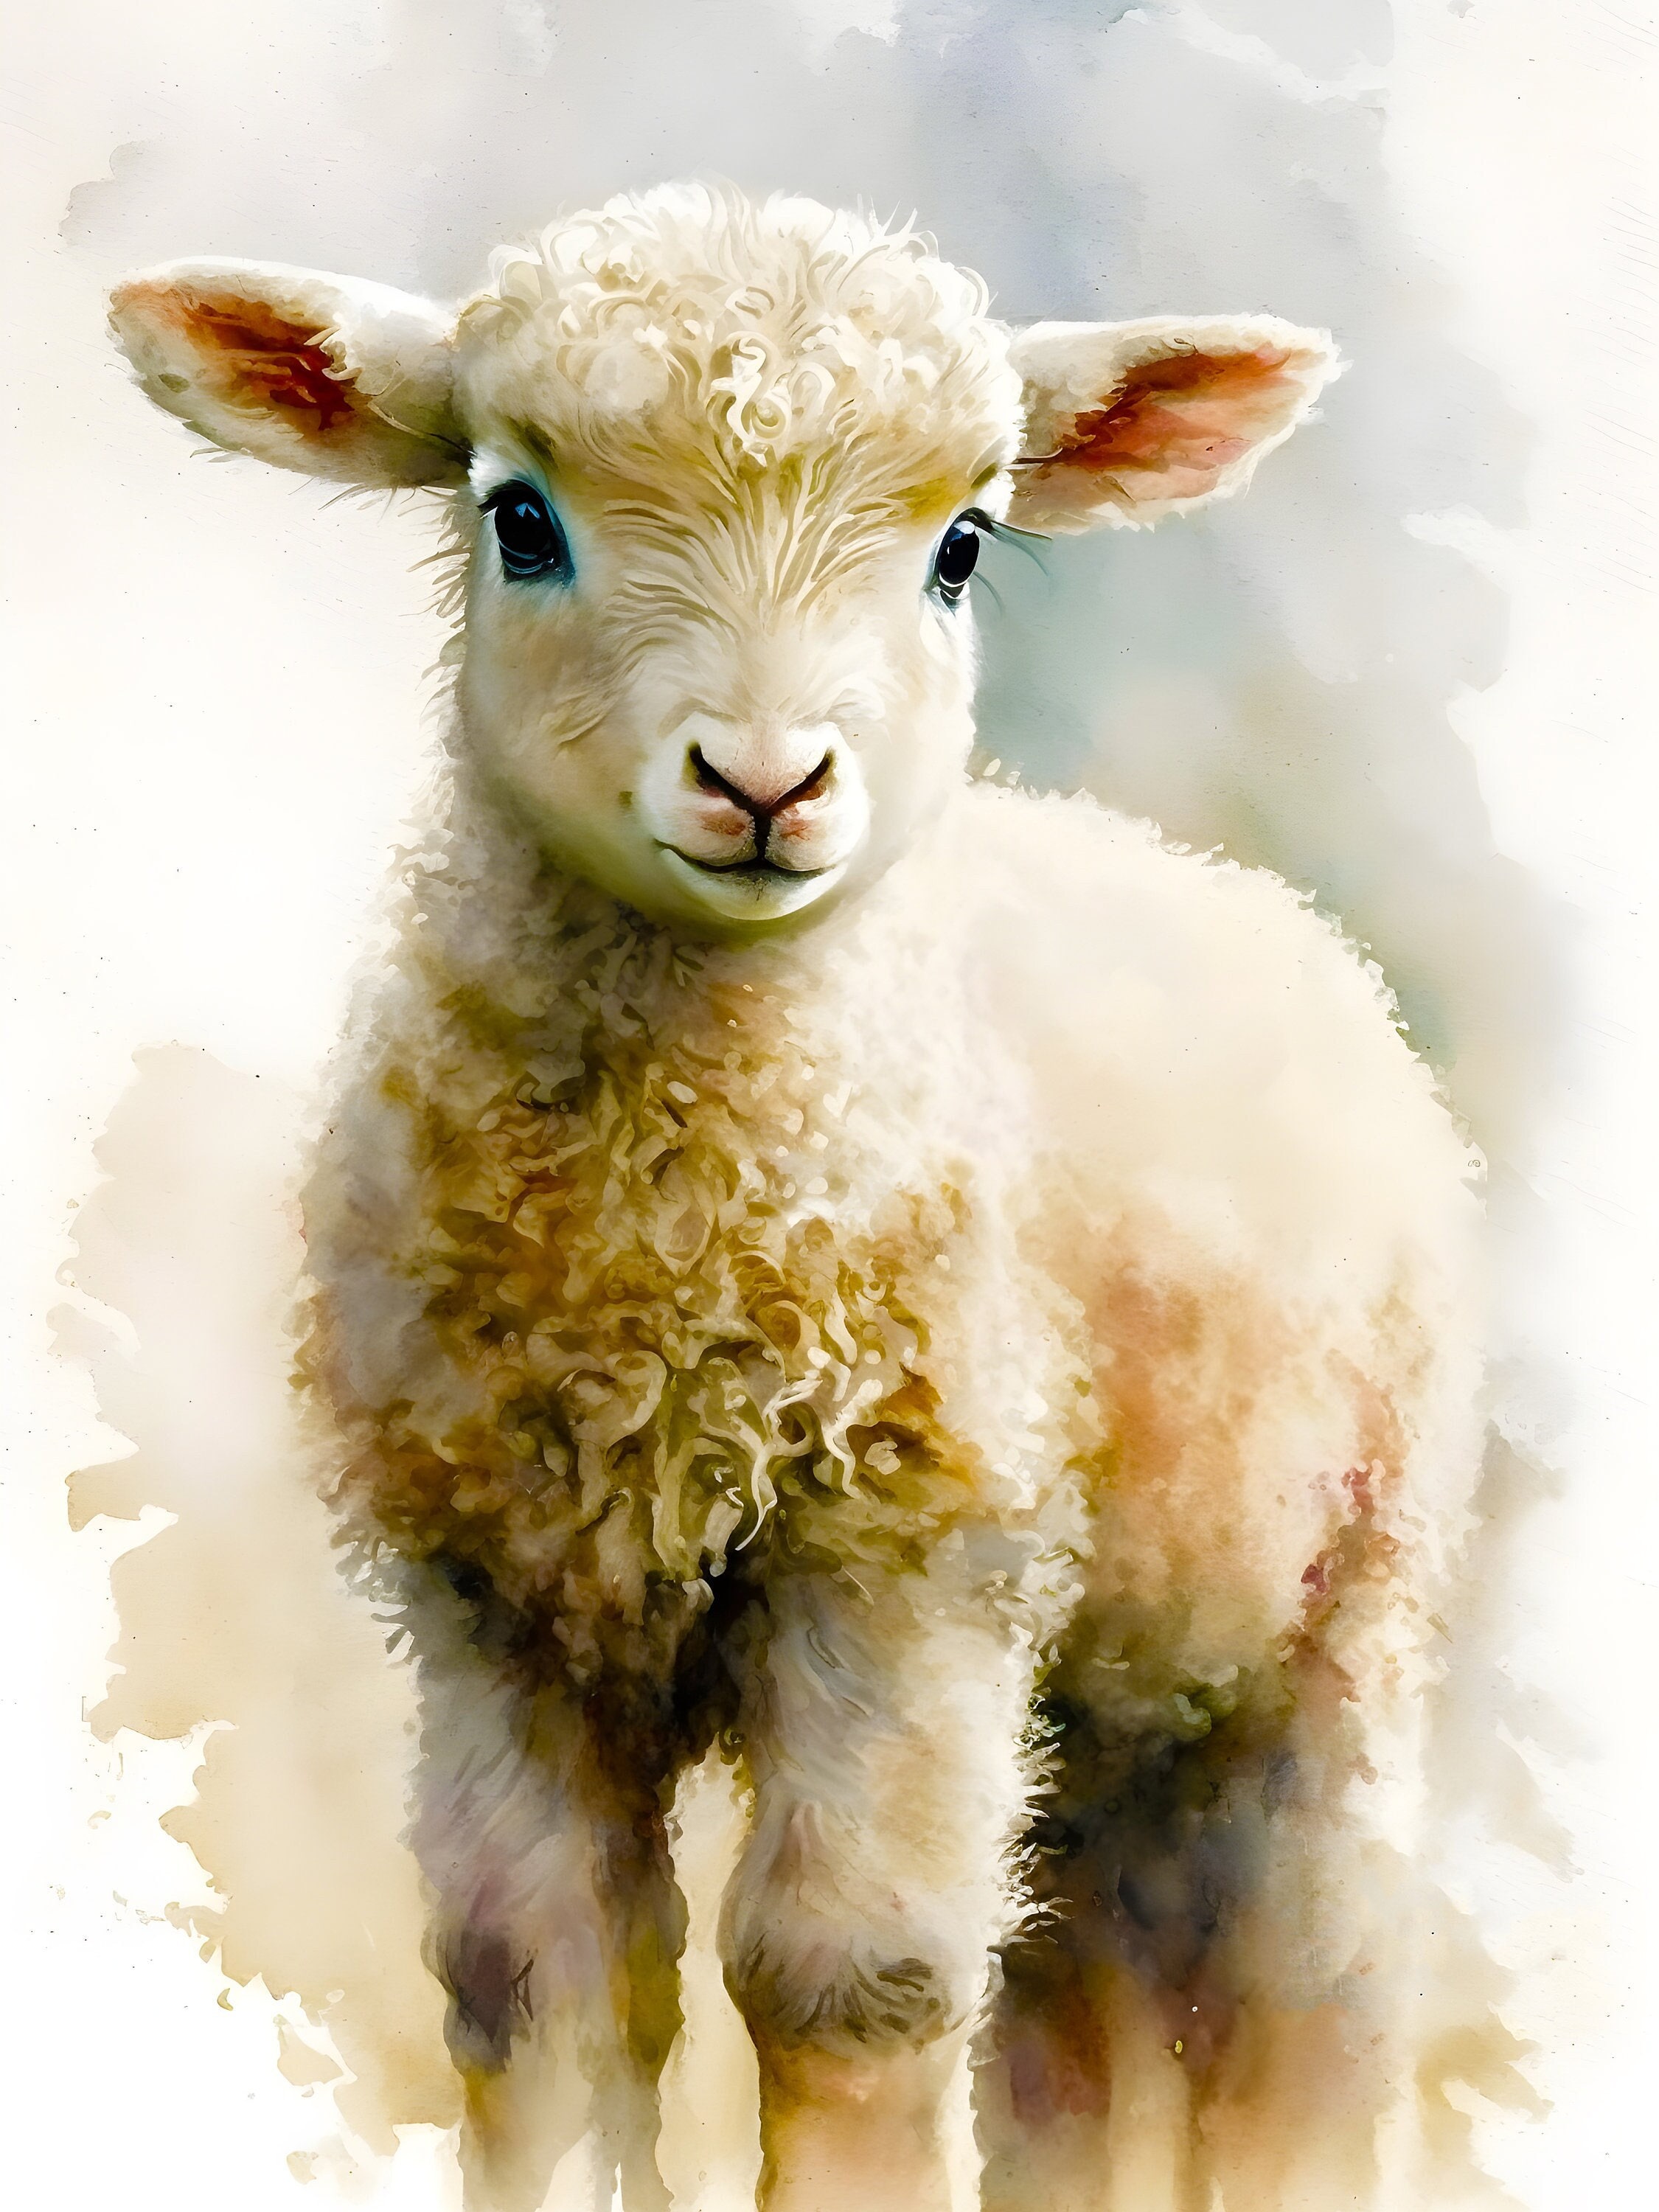 The Stupell Home Decor Soft and Sweet Baby Lamb and Shadow Oil Painting Framed Texturized Art, Size: 12 x 12